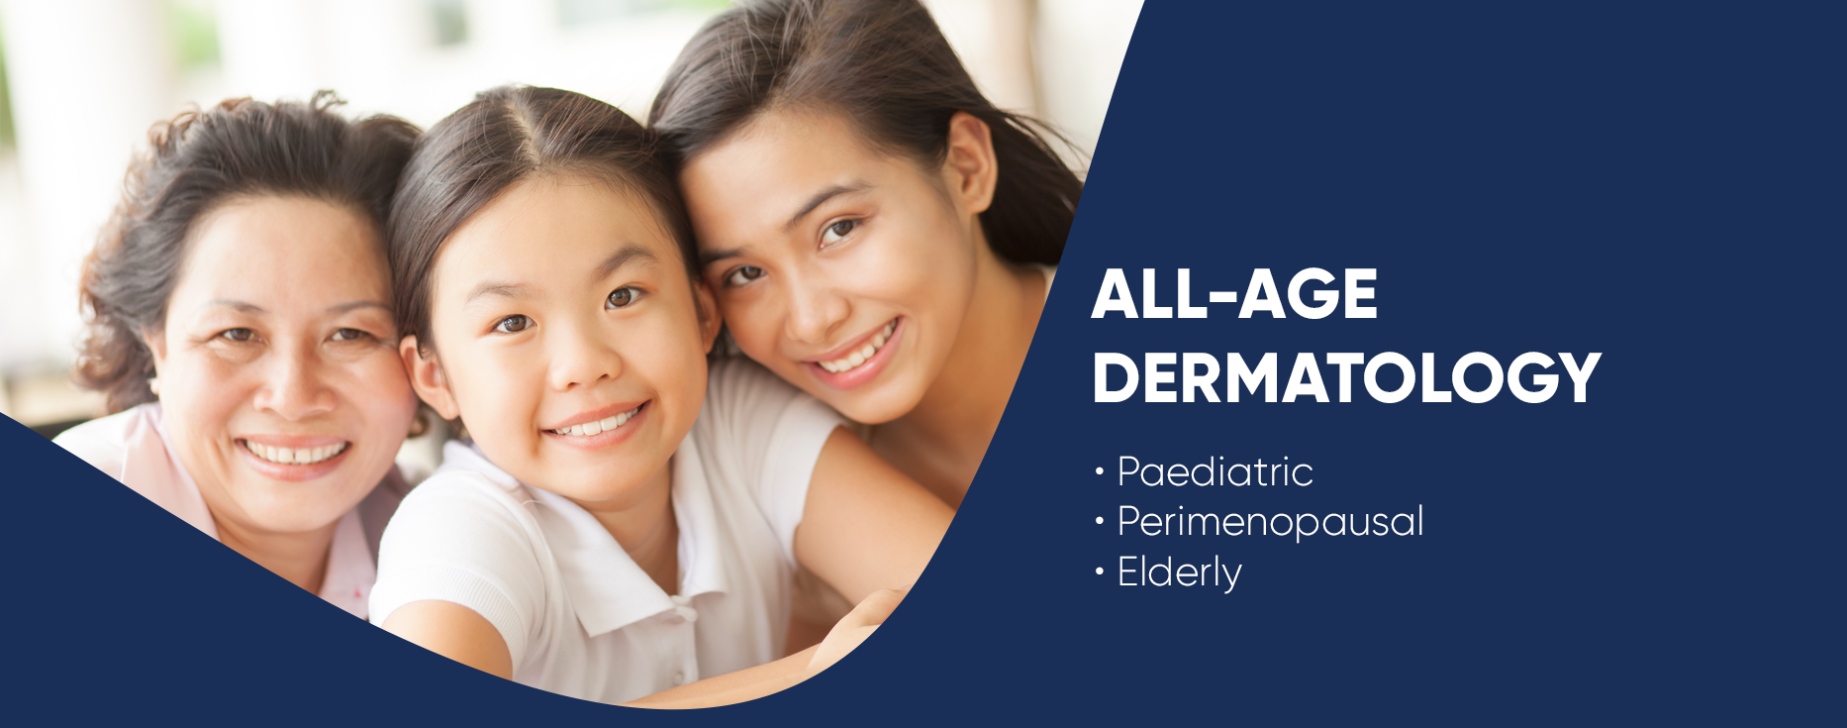 Dermatology for all ages